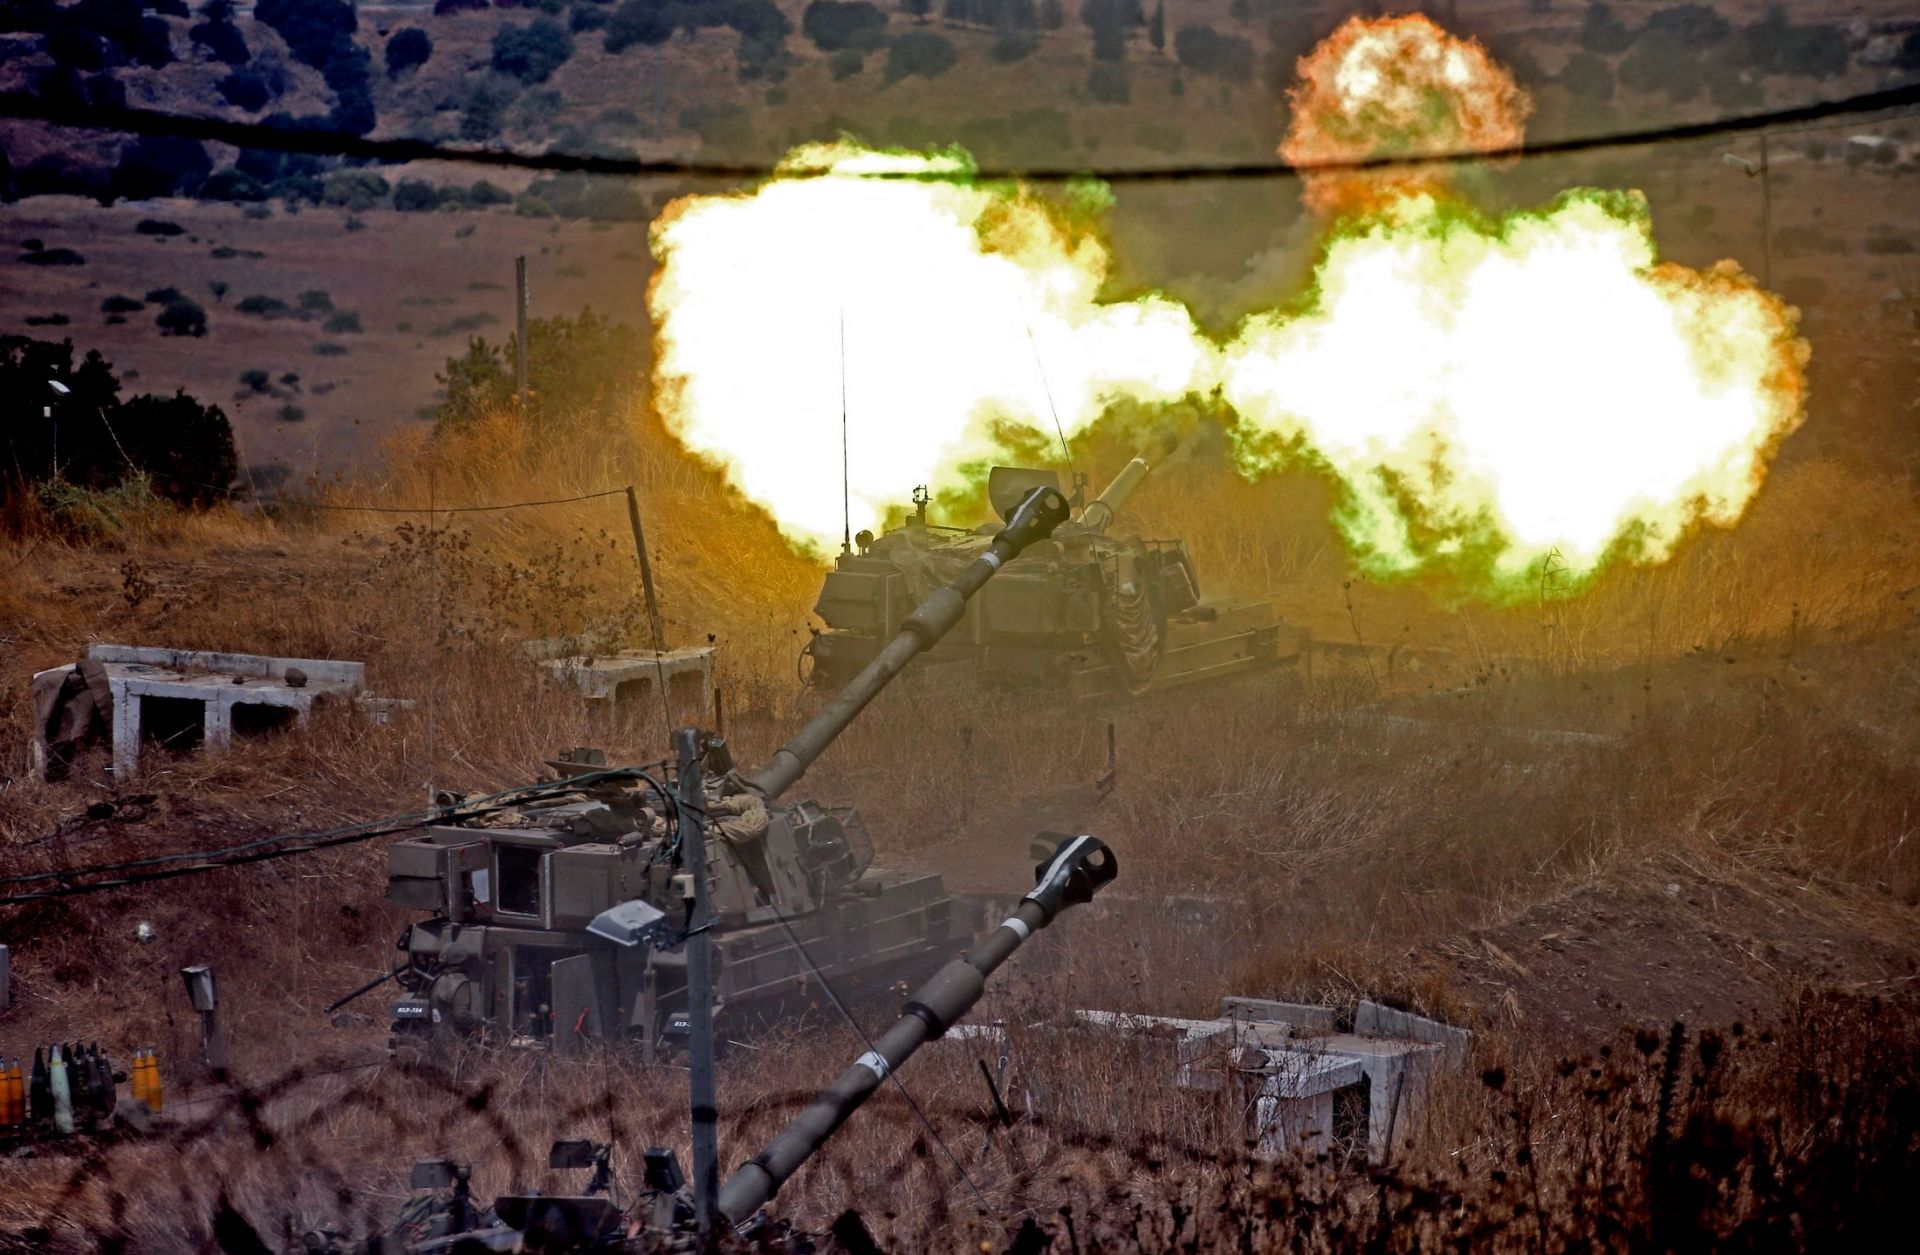 Israeli self-propelled howitzers fire toward Lebanon on Aug. 6, 2021, from a position near the northern Israeli town of Kiryat Shmona following rocket fire from the Lebanese side of the border.